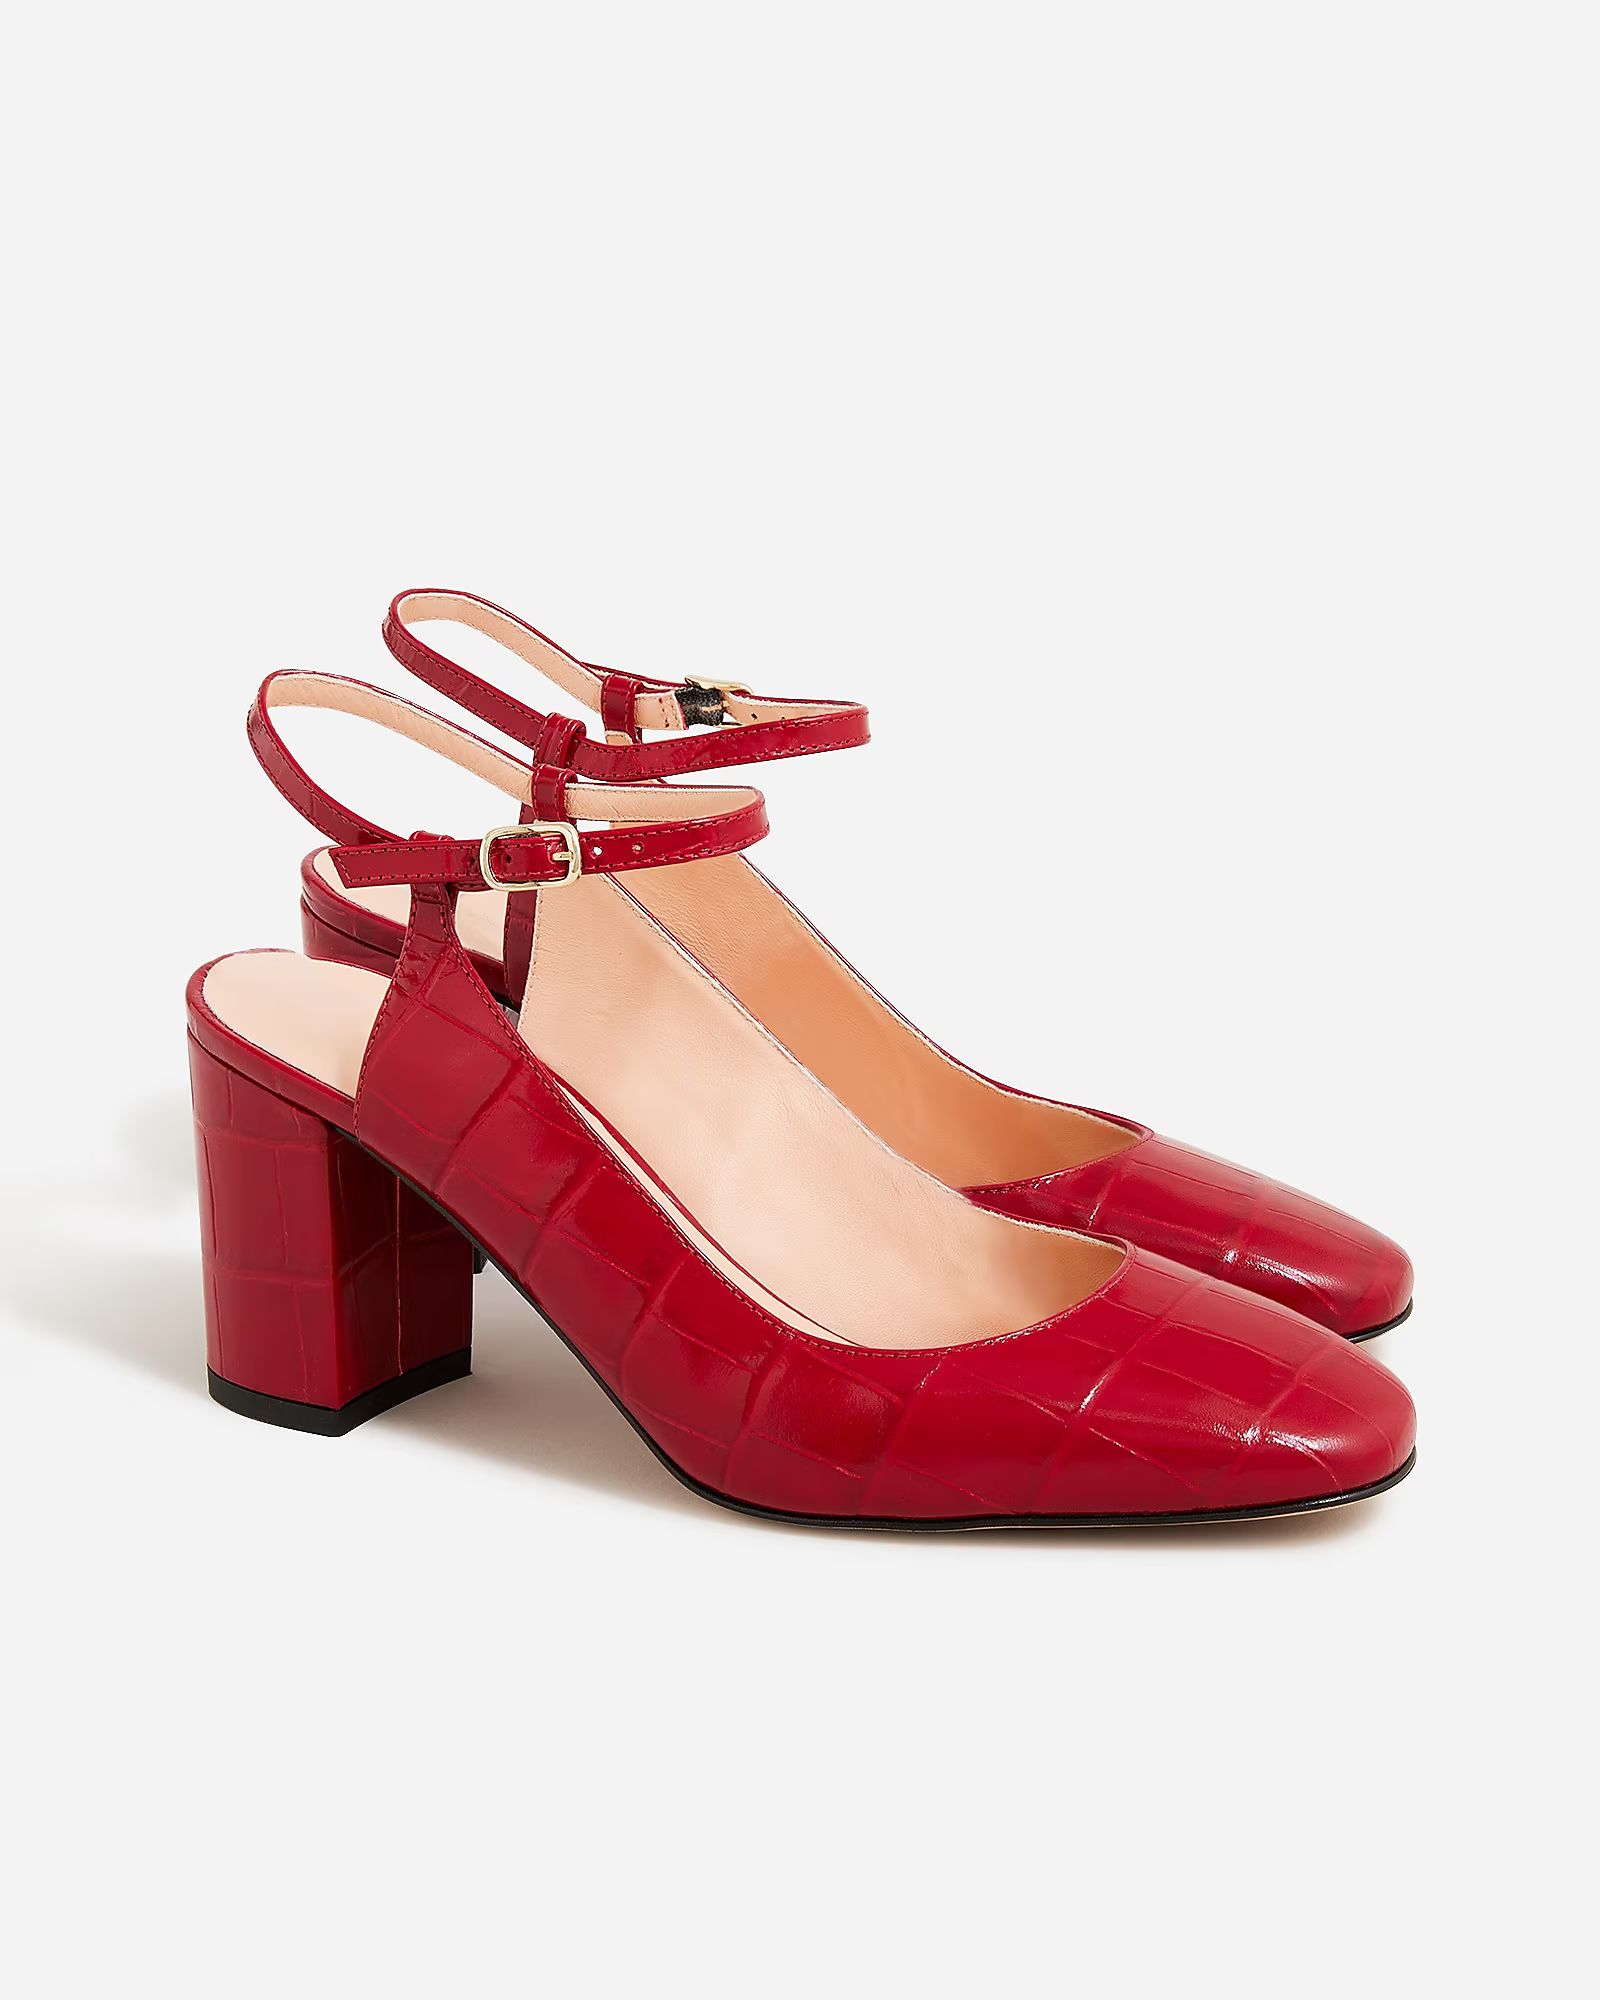 Maisie ankle-strap heels in croc-embossed leather | J.Crew US